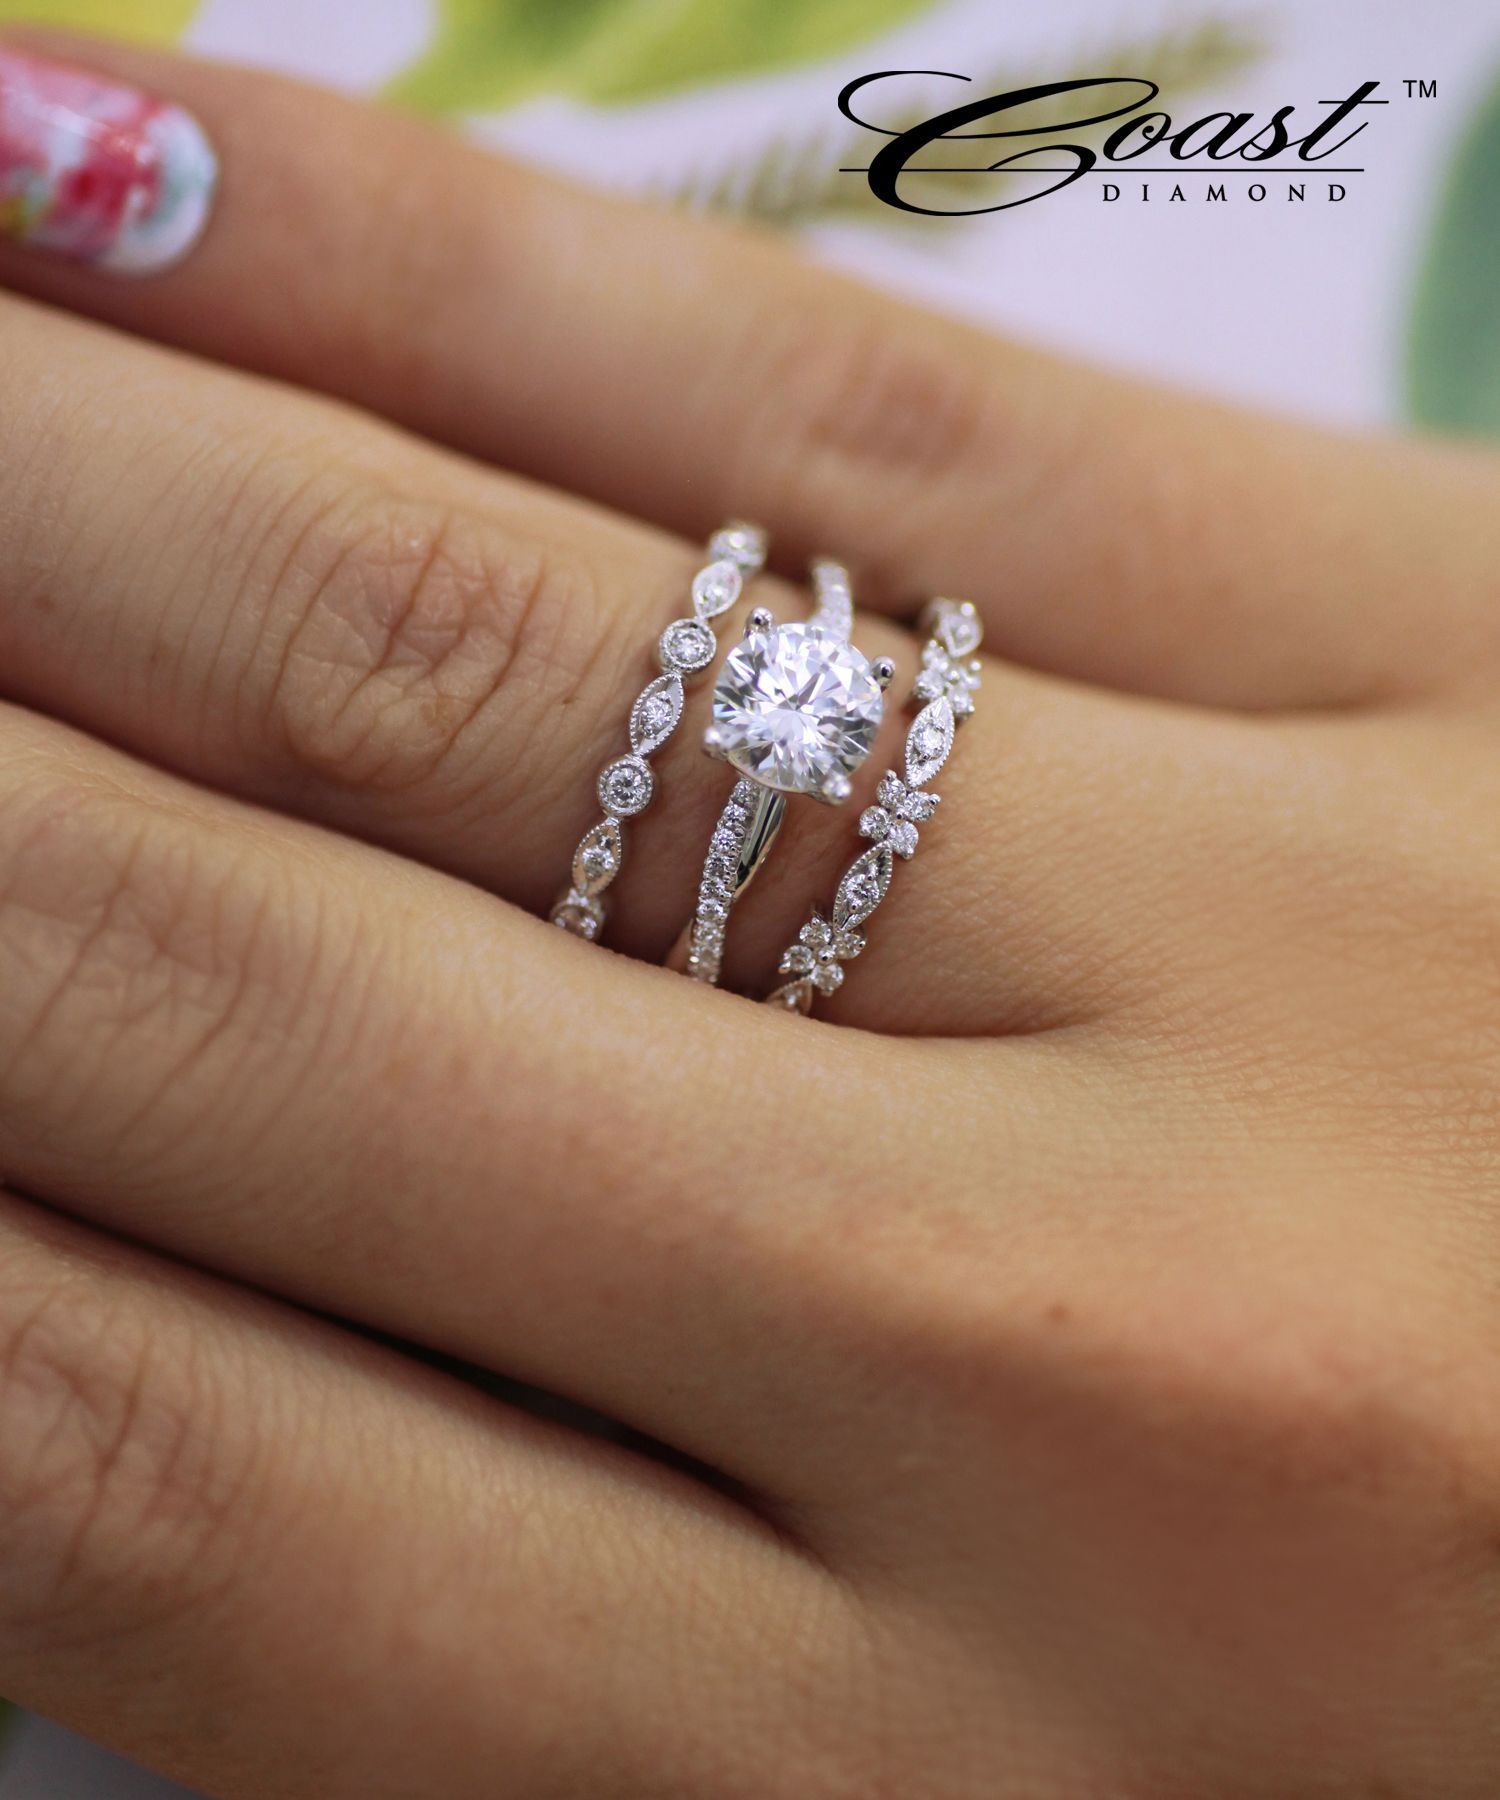 A Fashion Band Featuring Brilliant Round Diamonds Set In Intended For Most Up To Date Marquise And Round Diamond Alternating Anniversary Bands In White Gold (View 8 of 25)